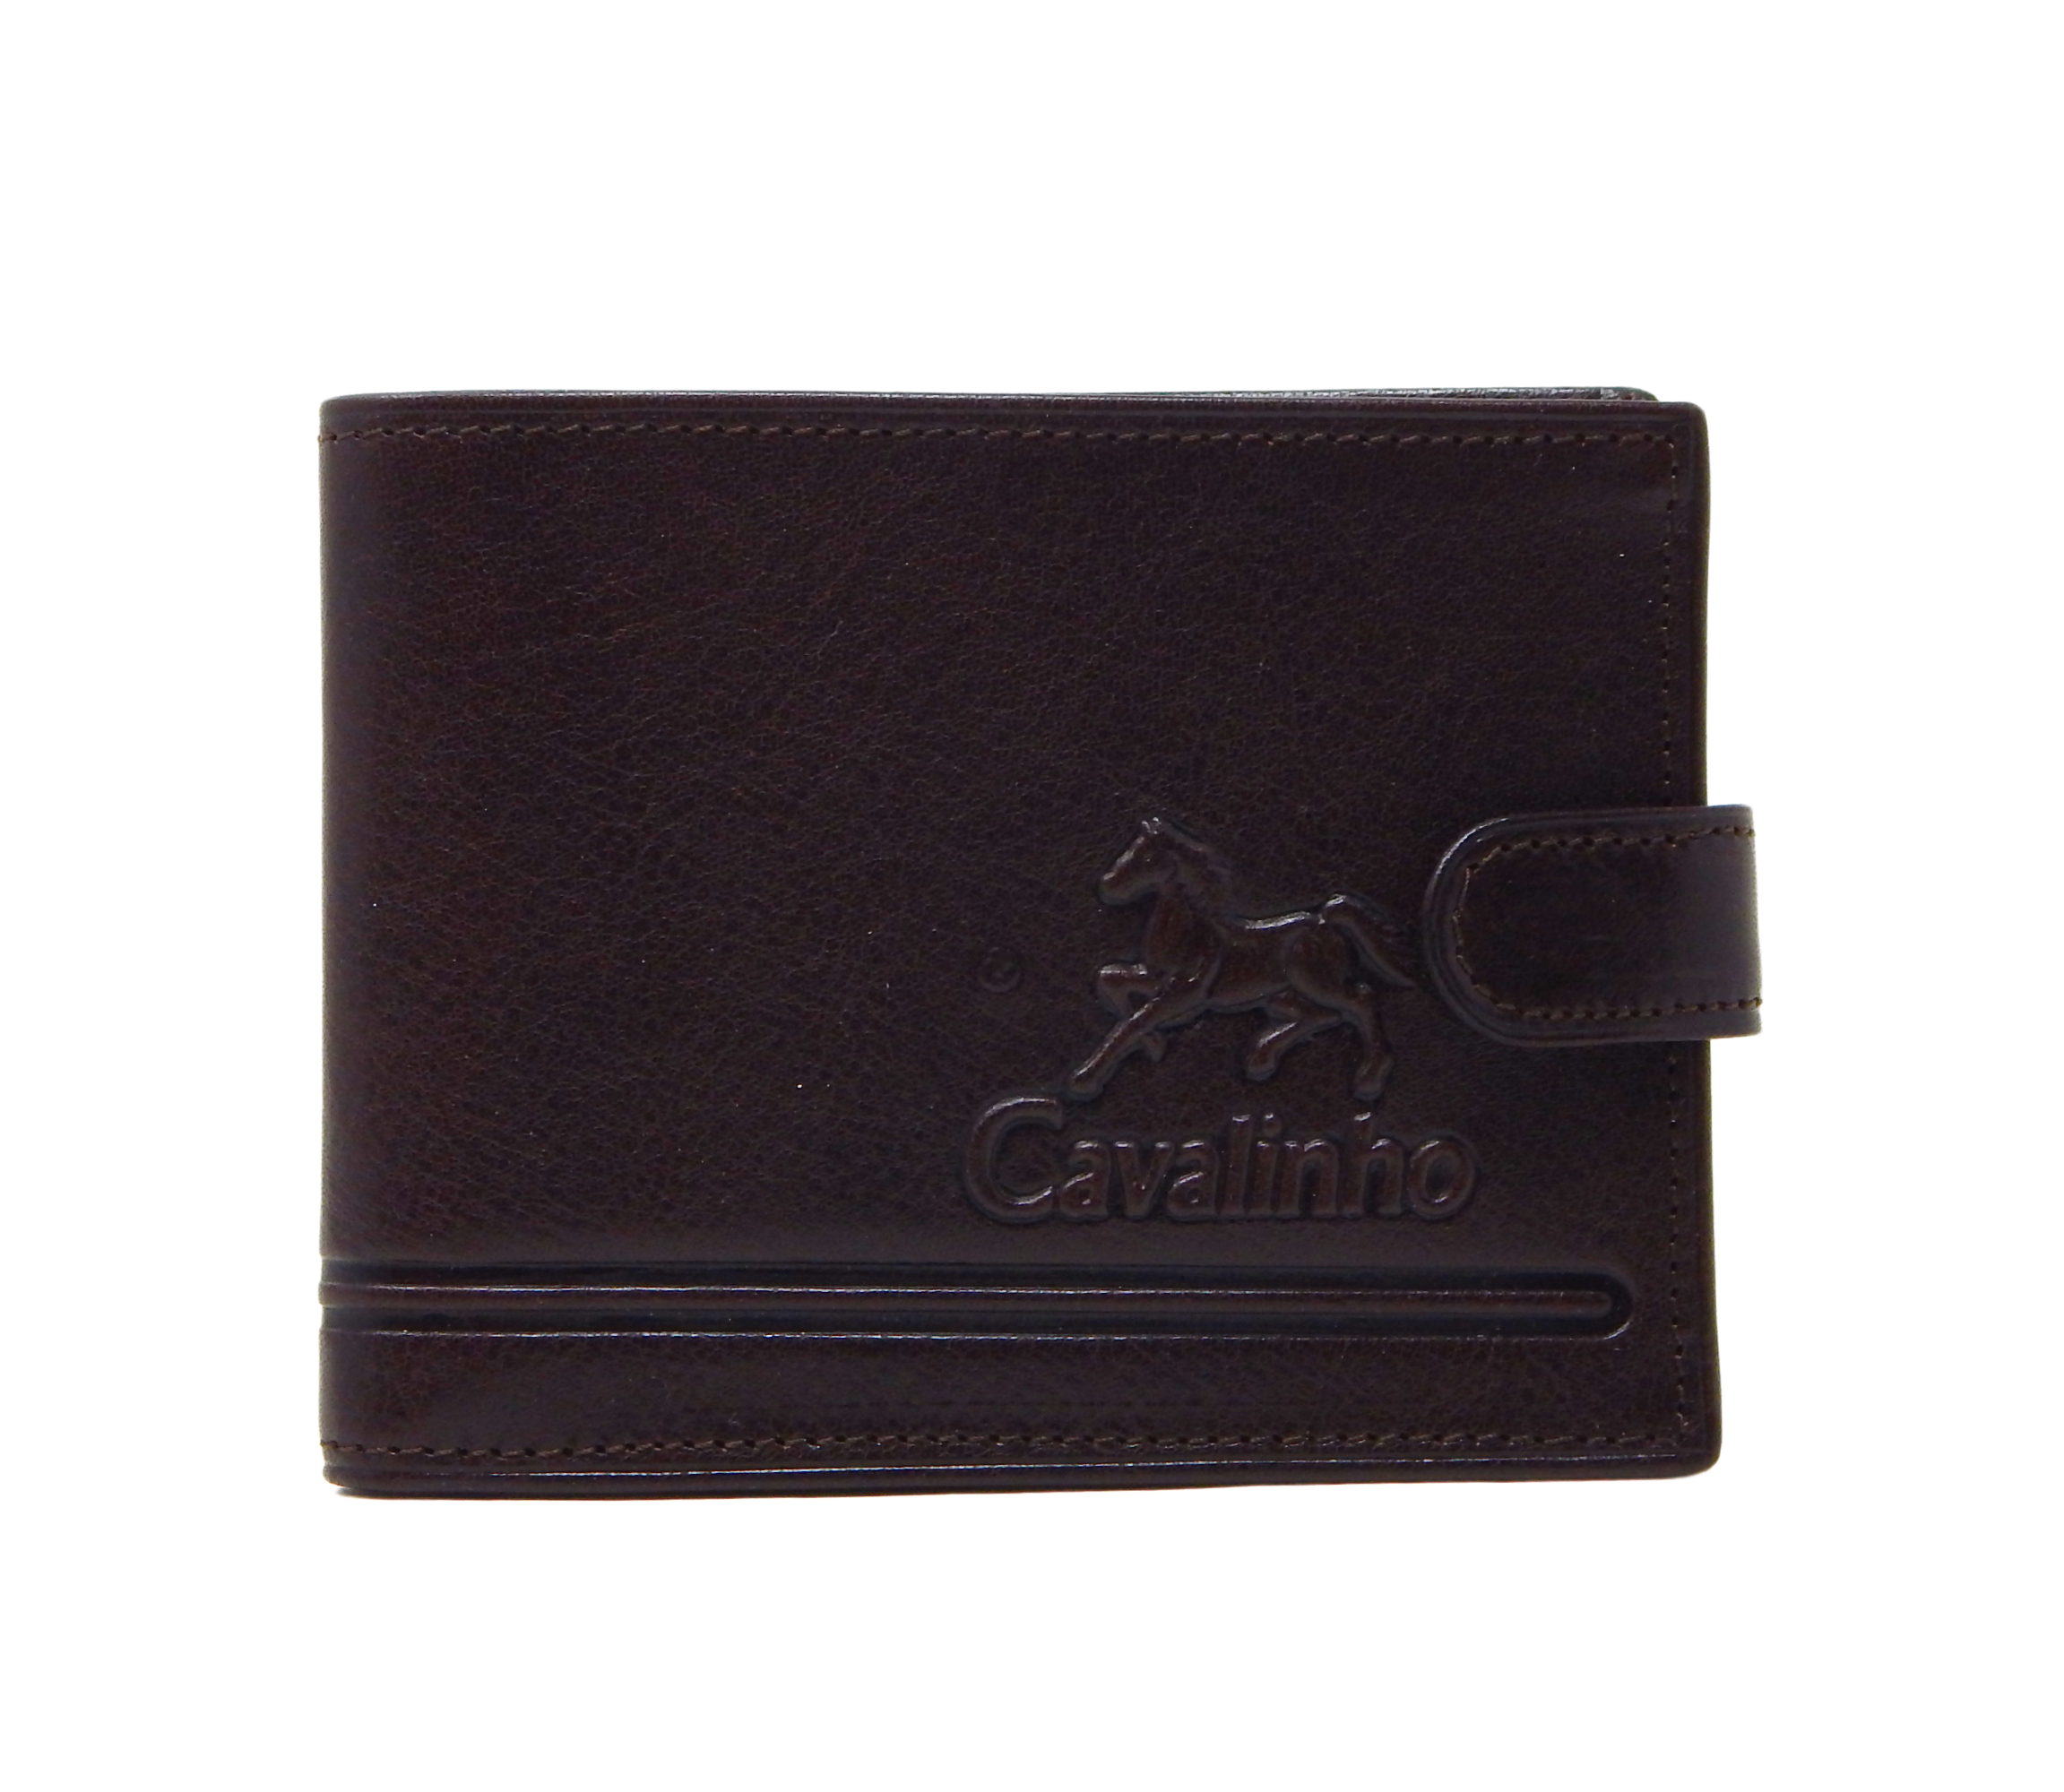 #color_ Brown | Cavalinho Leather Trifold Wallet - Brown - 28610564.02_1